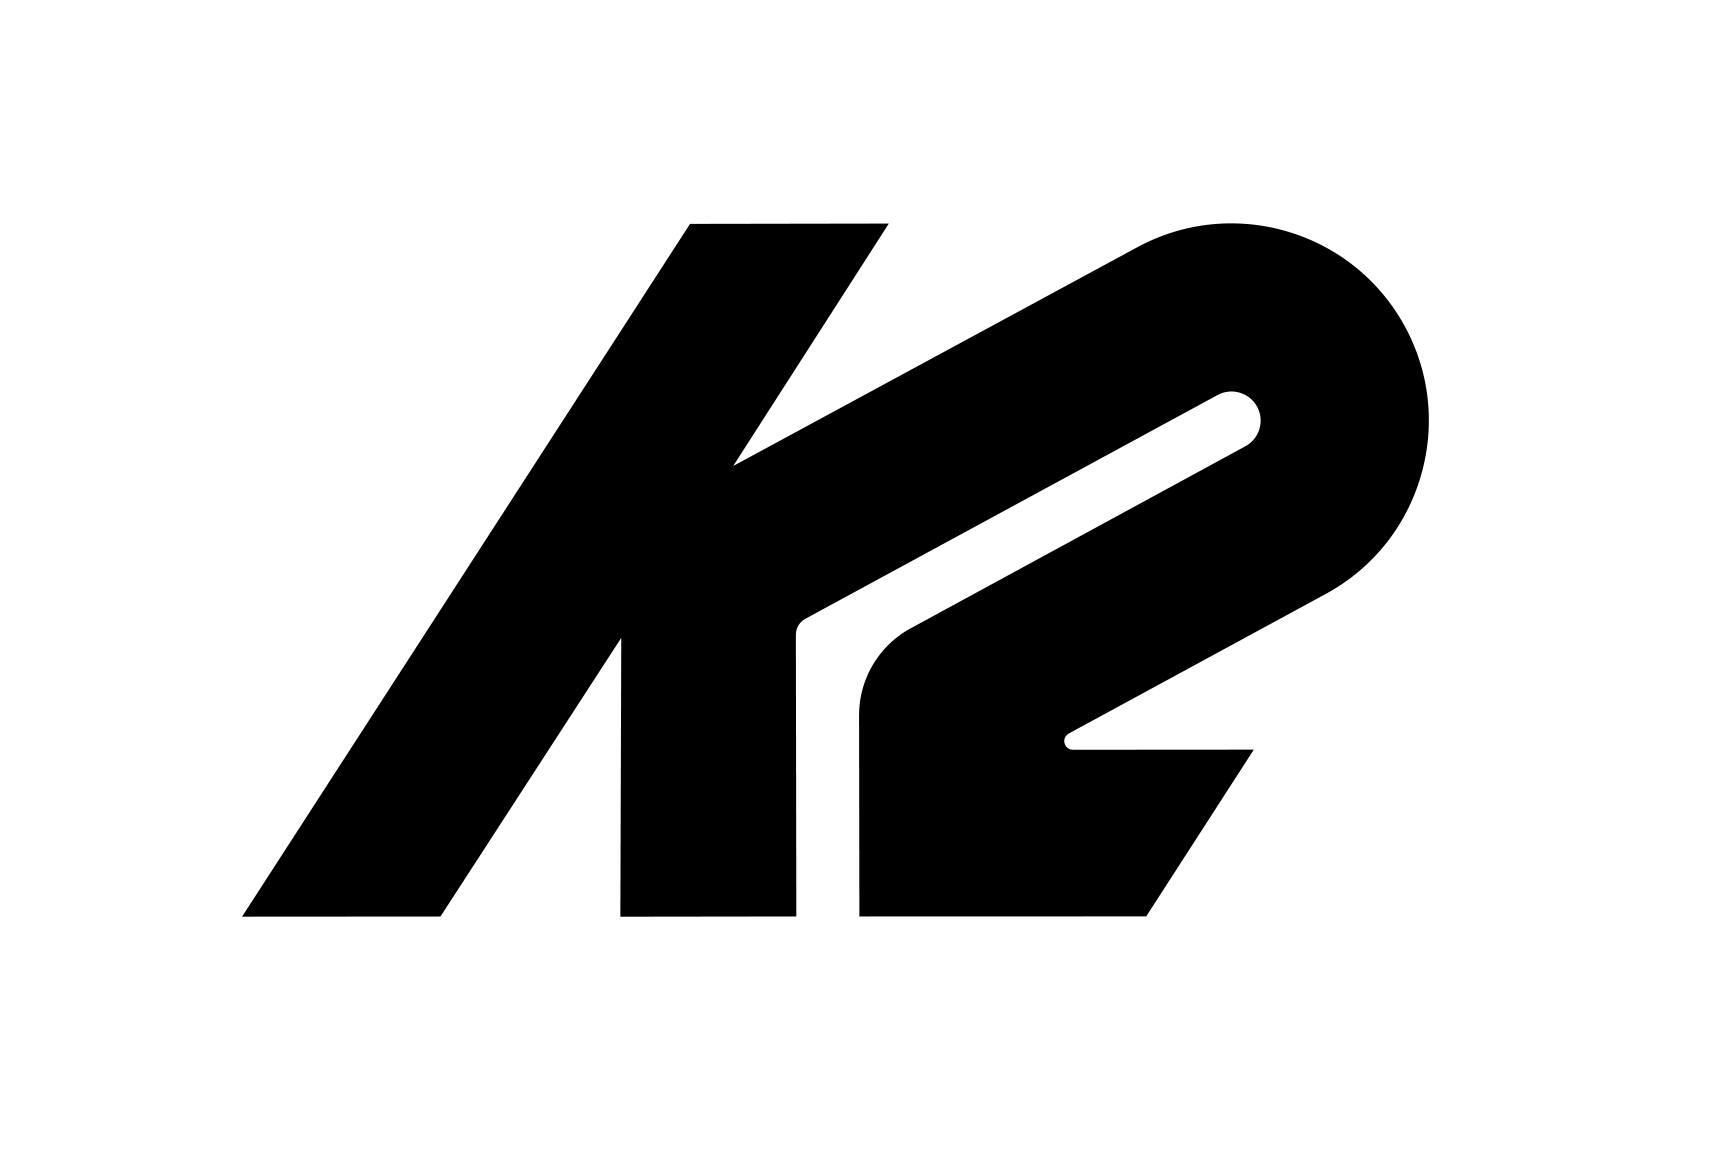 The K2 logo reads "K2" in an interconnected, single-line text. 